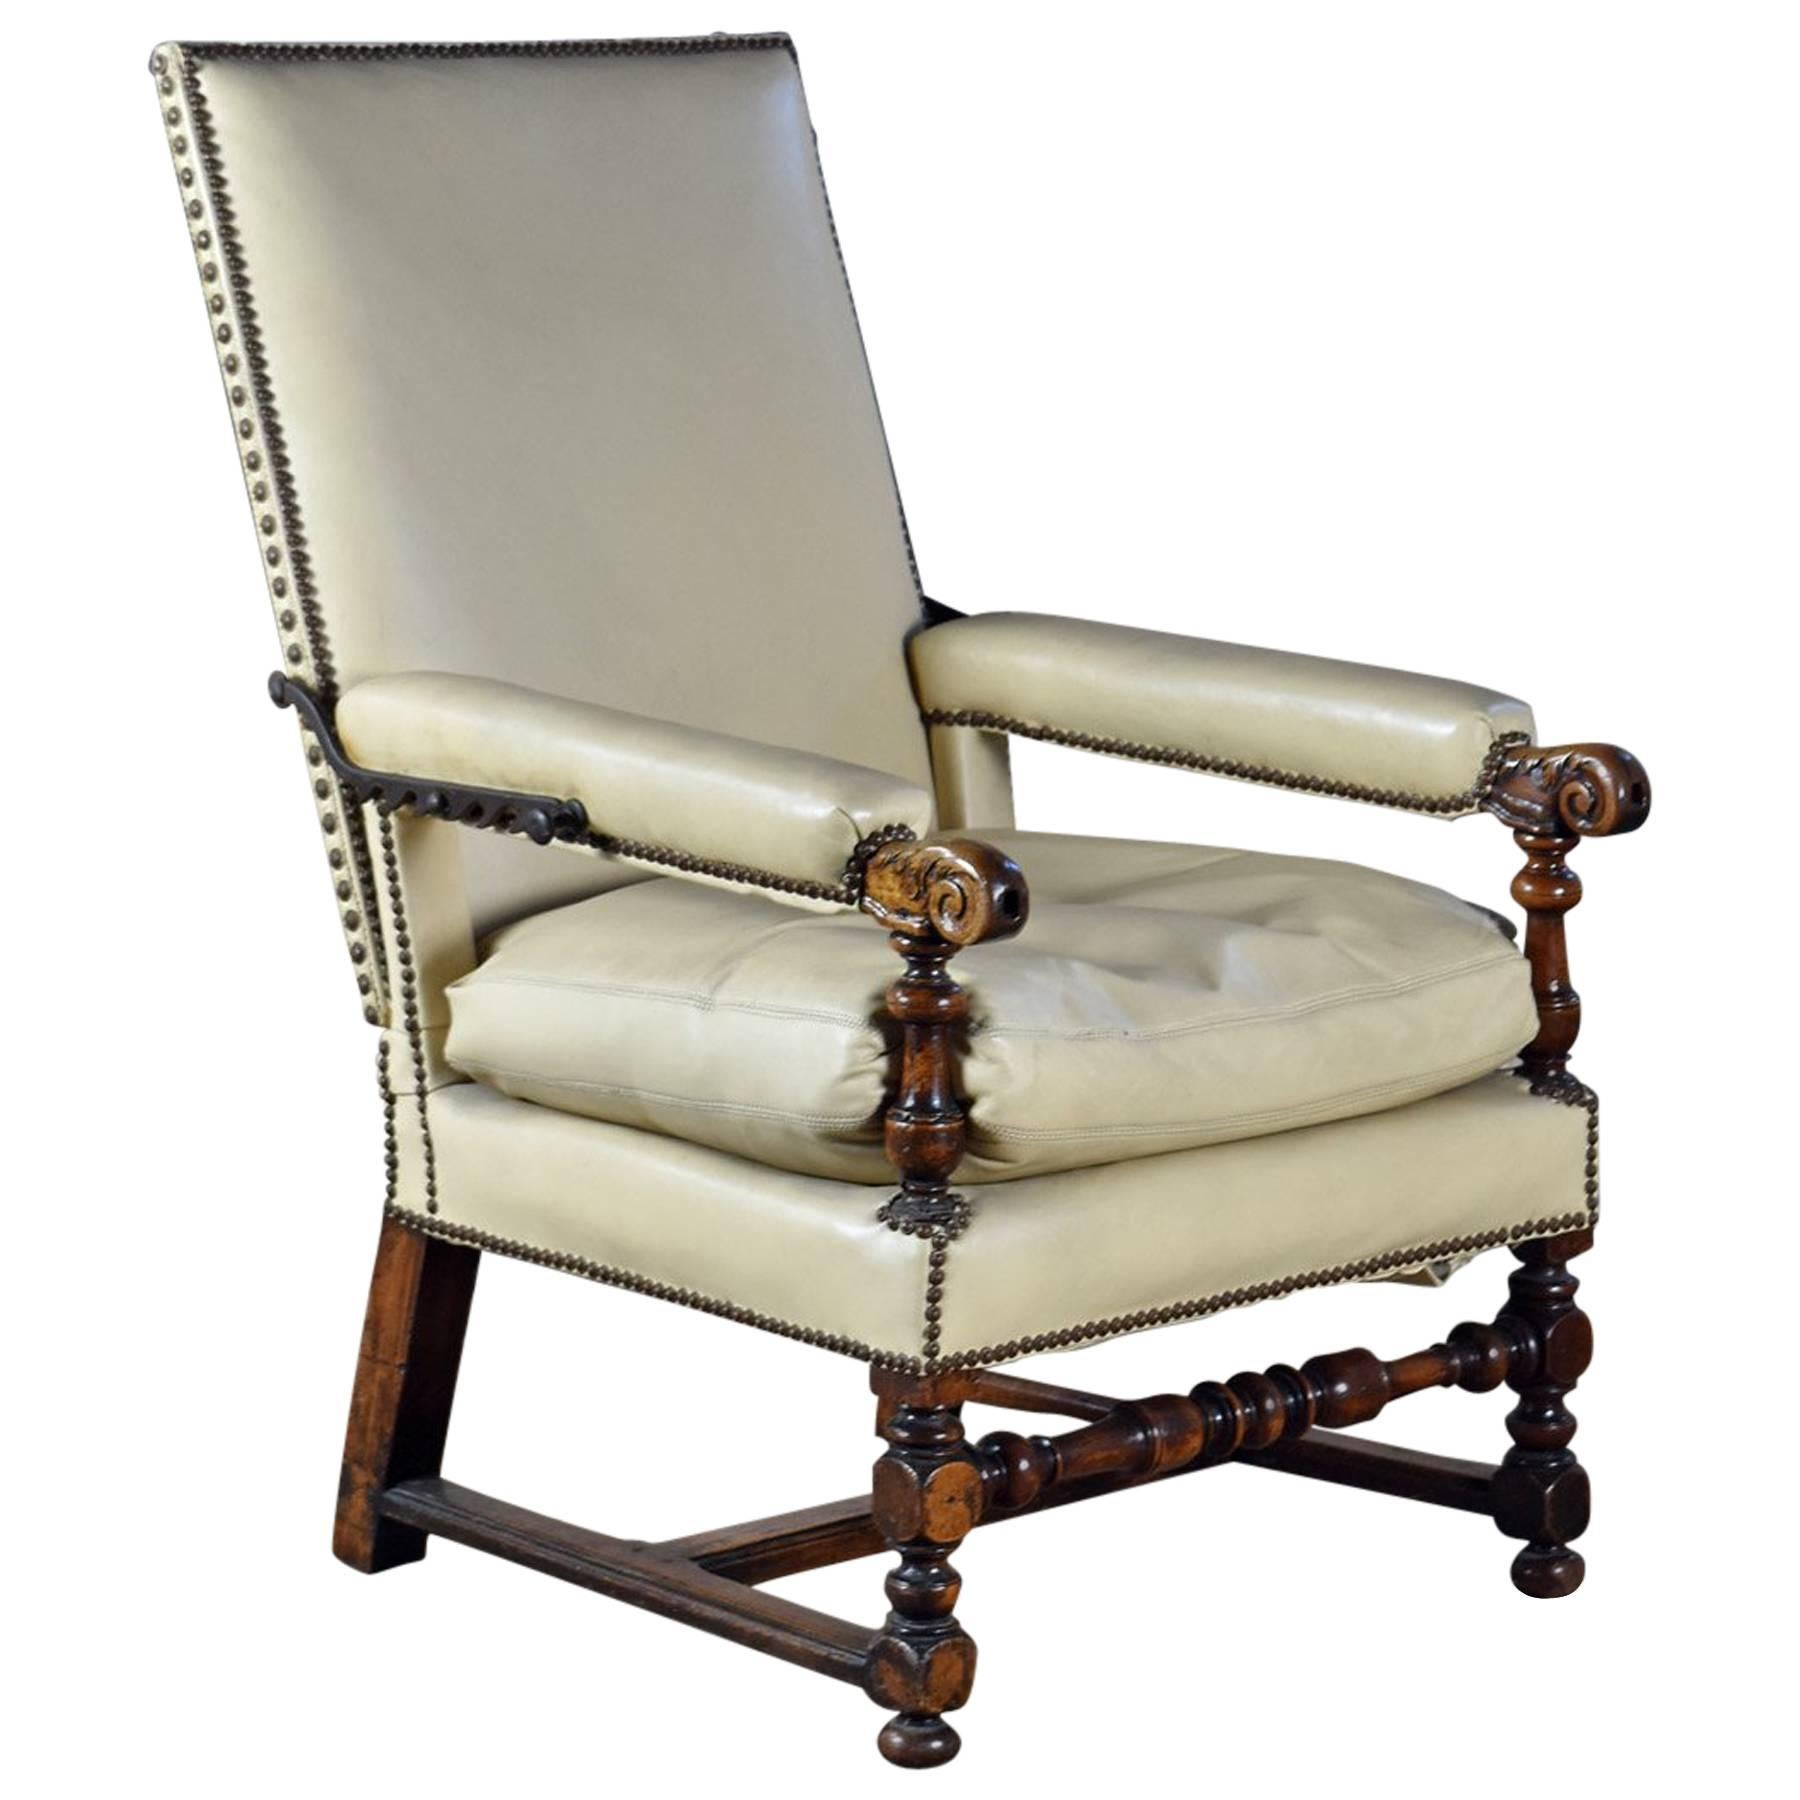 French 17th Century Walnut and Leather Covered Reclining or Ratchet Chair For Sale